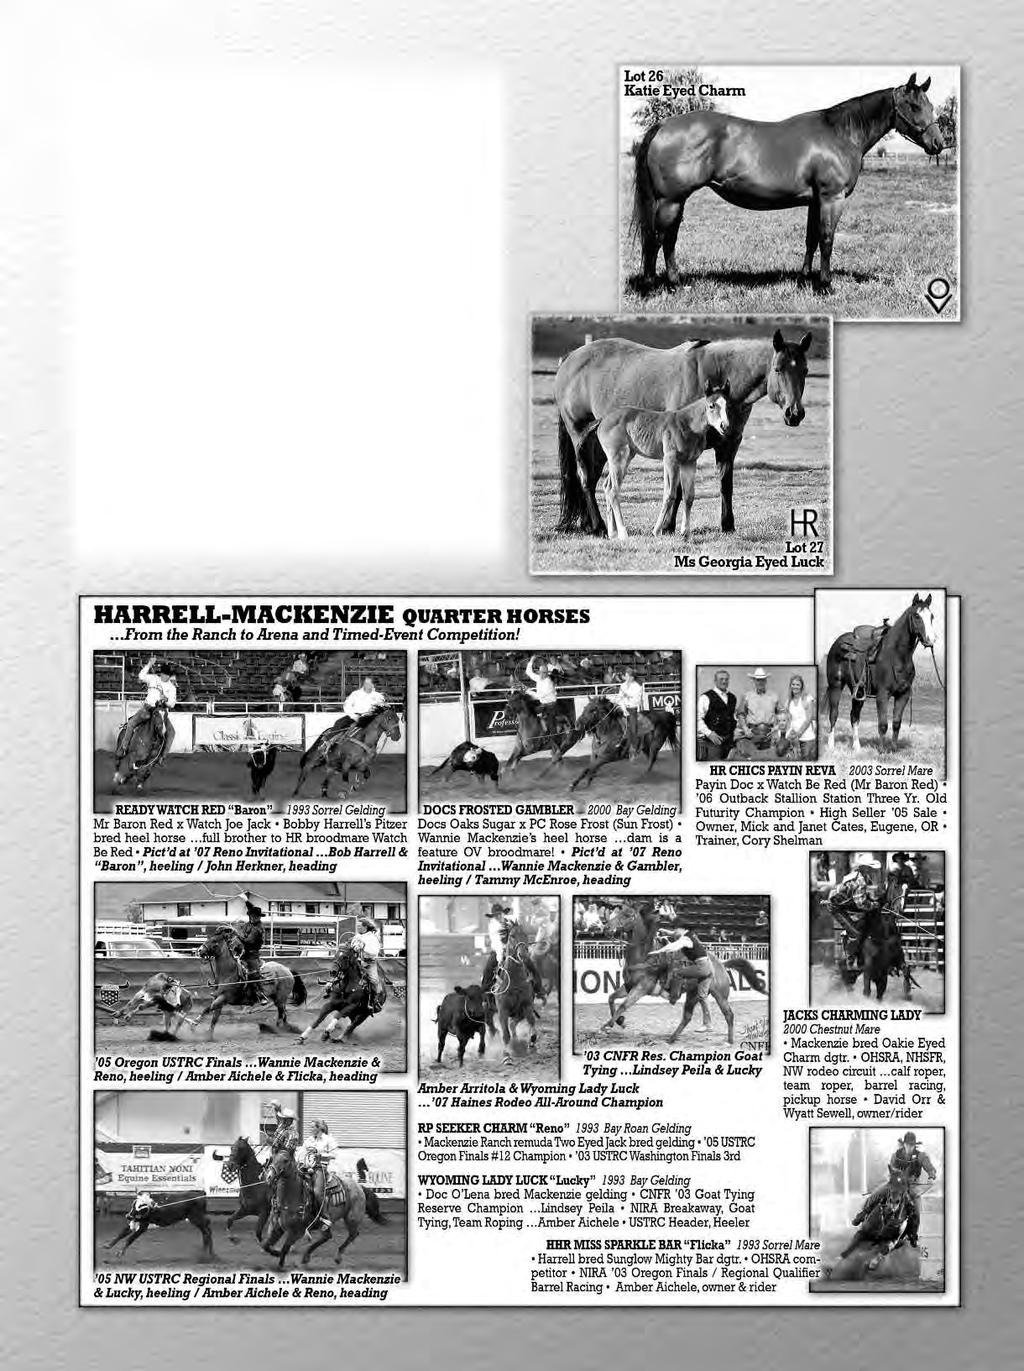 26 KATIE EYED CHARM 1991 Bay Mare #3042446 STRAWBERRY JACK TWO EYED JACK ROAN CHARMER MARGIE STAR STAR EYED CHARM STAR EYED JACK EZ GEORGIA SIR RELIC SIR BAR MISS FRANCY RELIC STRING RELIC CARR S